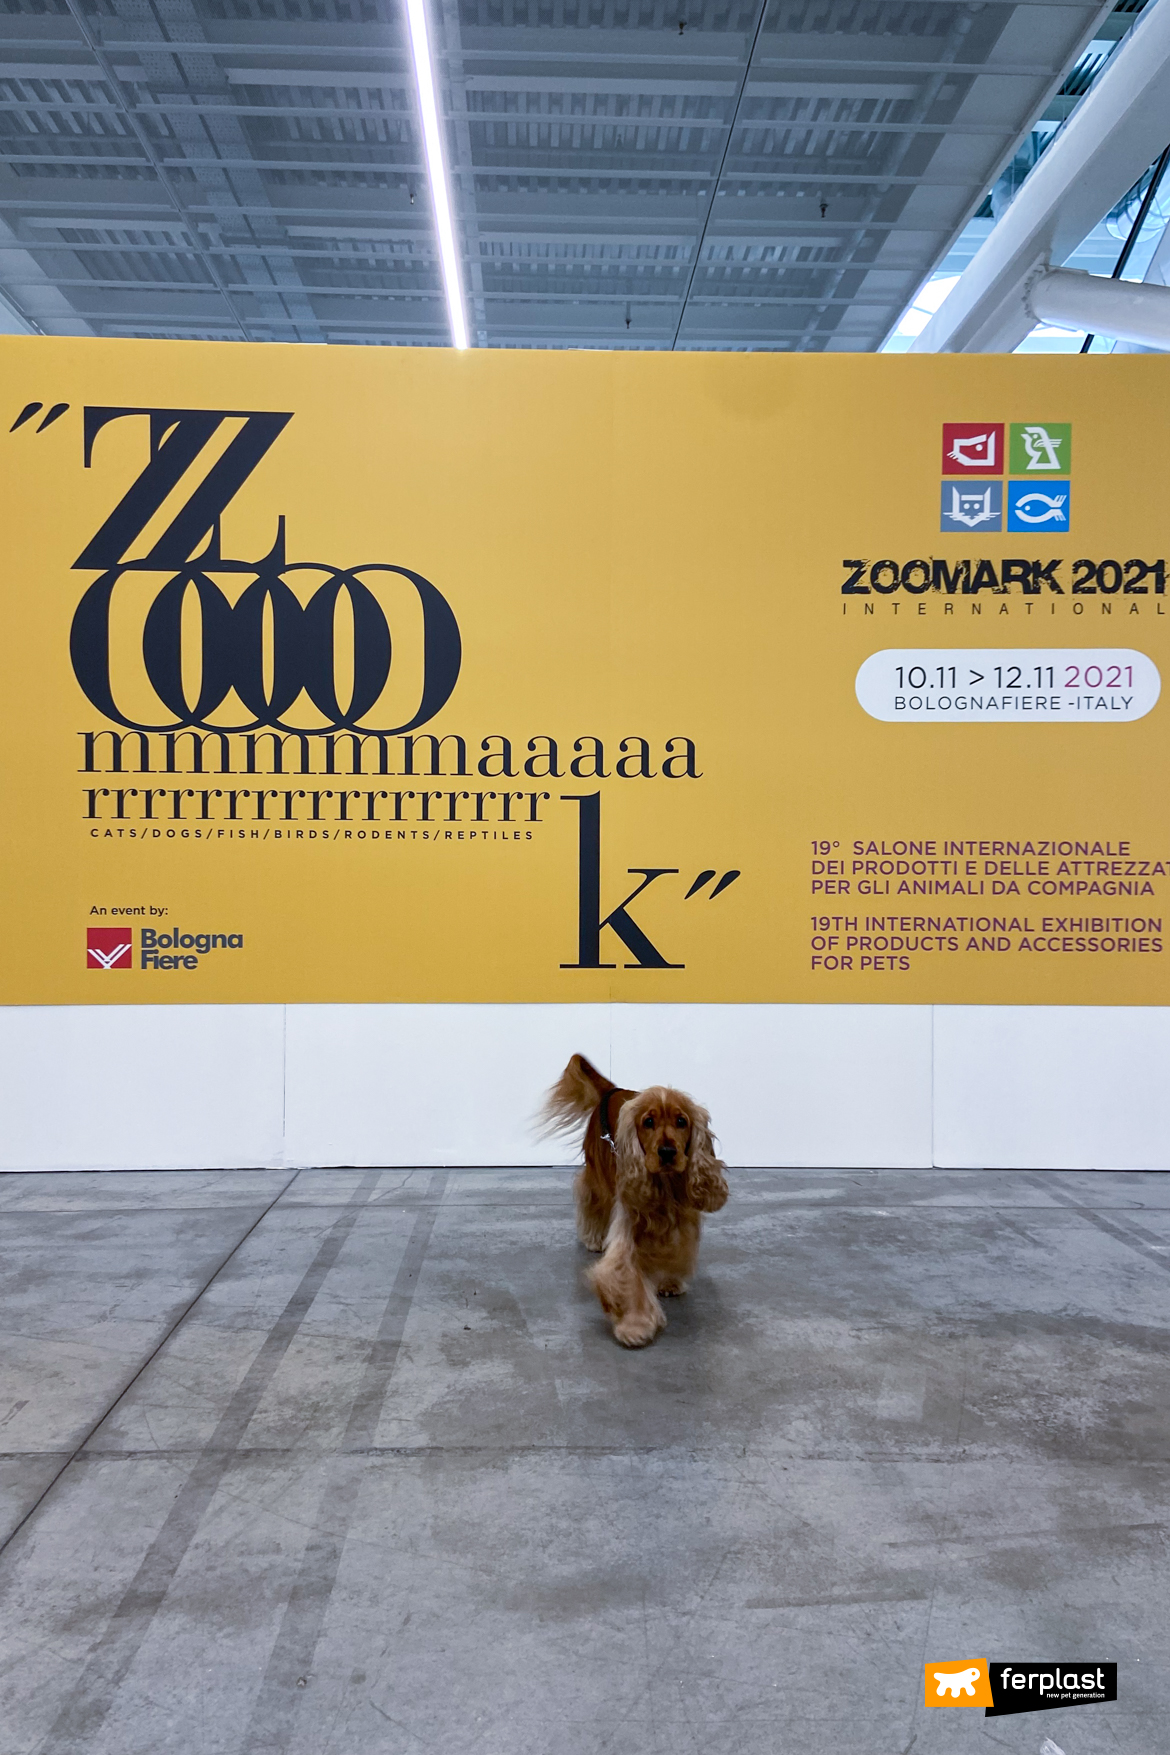 Dog posing in front of Zoomark 2021 entrance